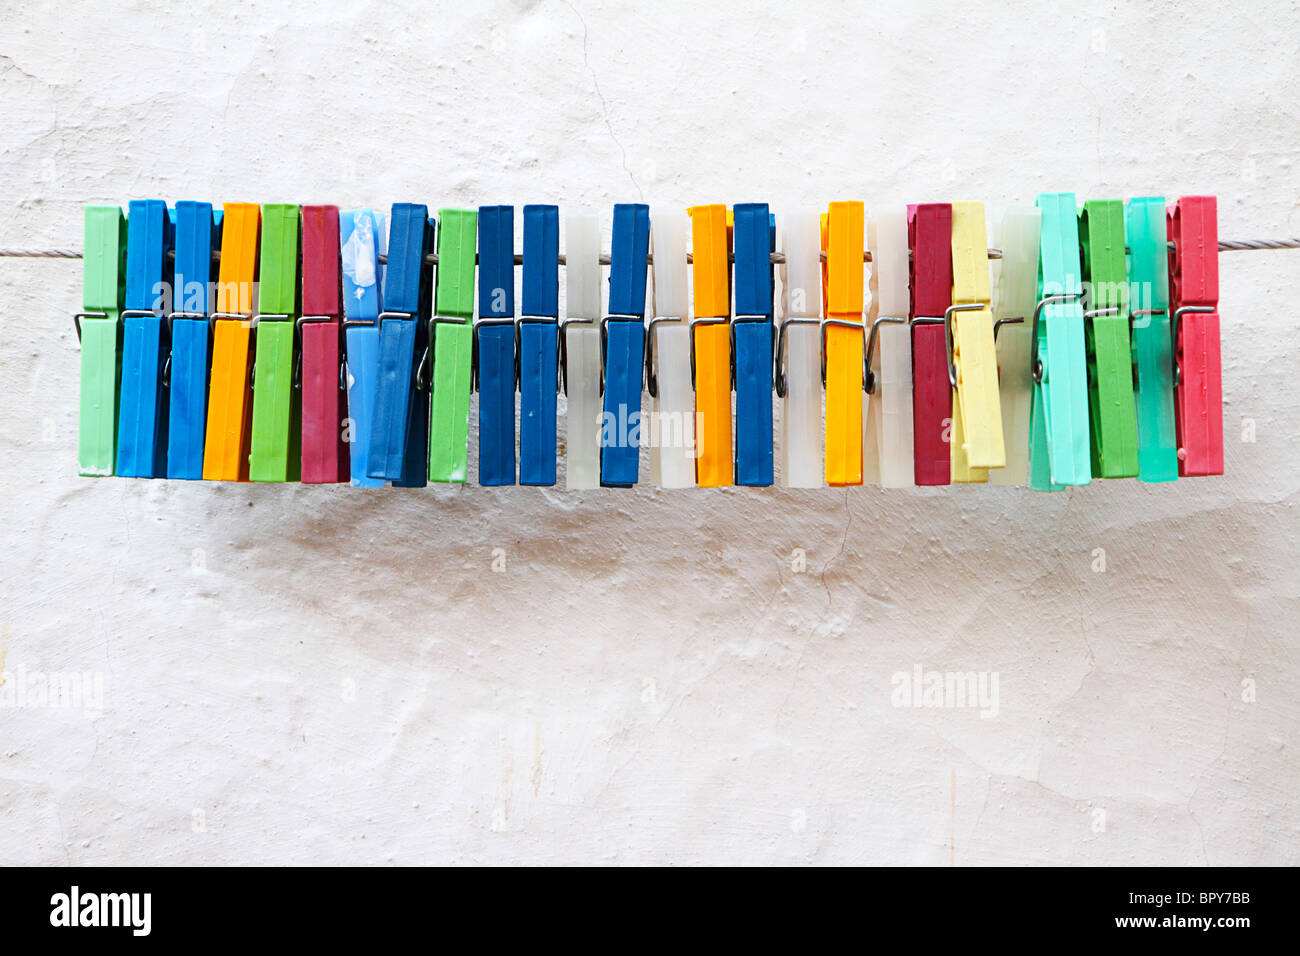 Row of plastic clothes pegs against whitewashed wall Stock Photo